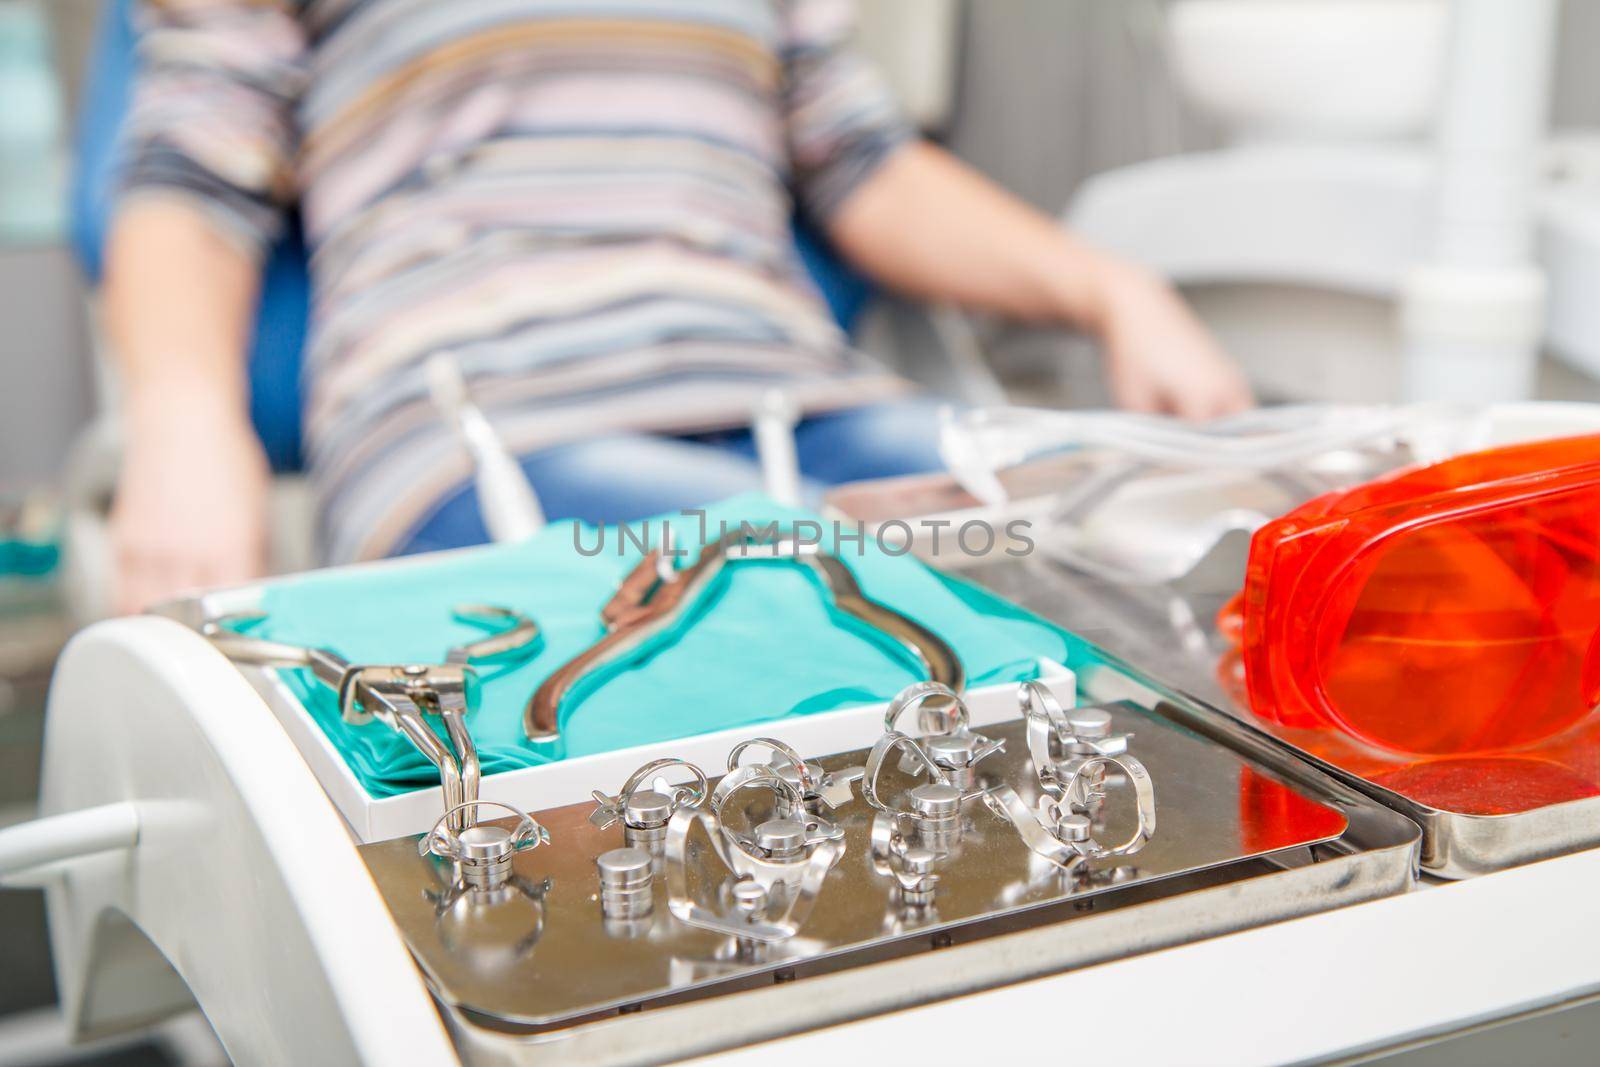 Dental instruments on stainless steel tray are prepared for the dental treatment of patient in dental clinic. Professional tools for dentists. Shallow depth of field, focus on instruments.